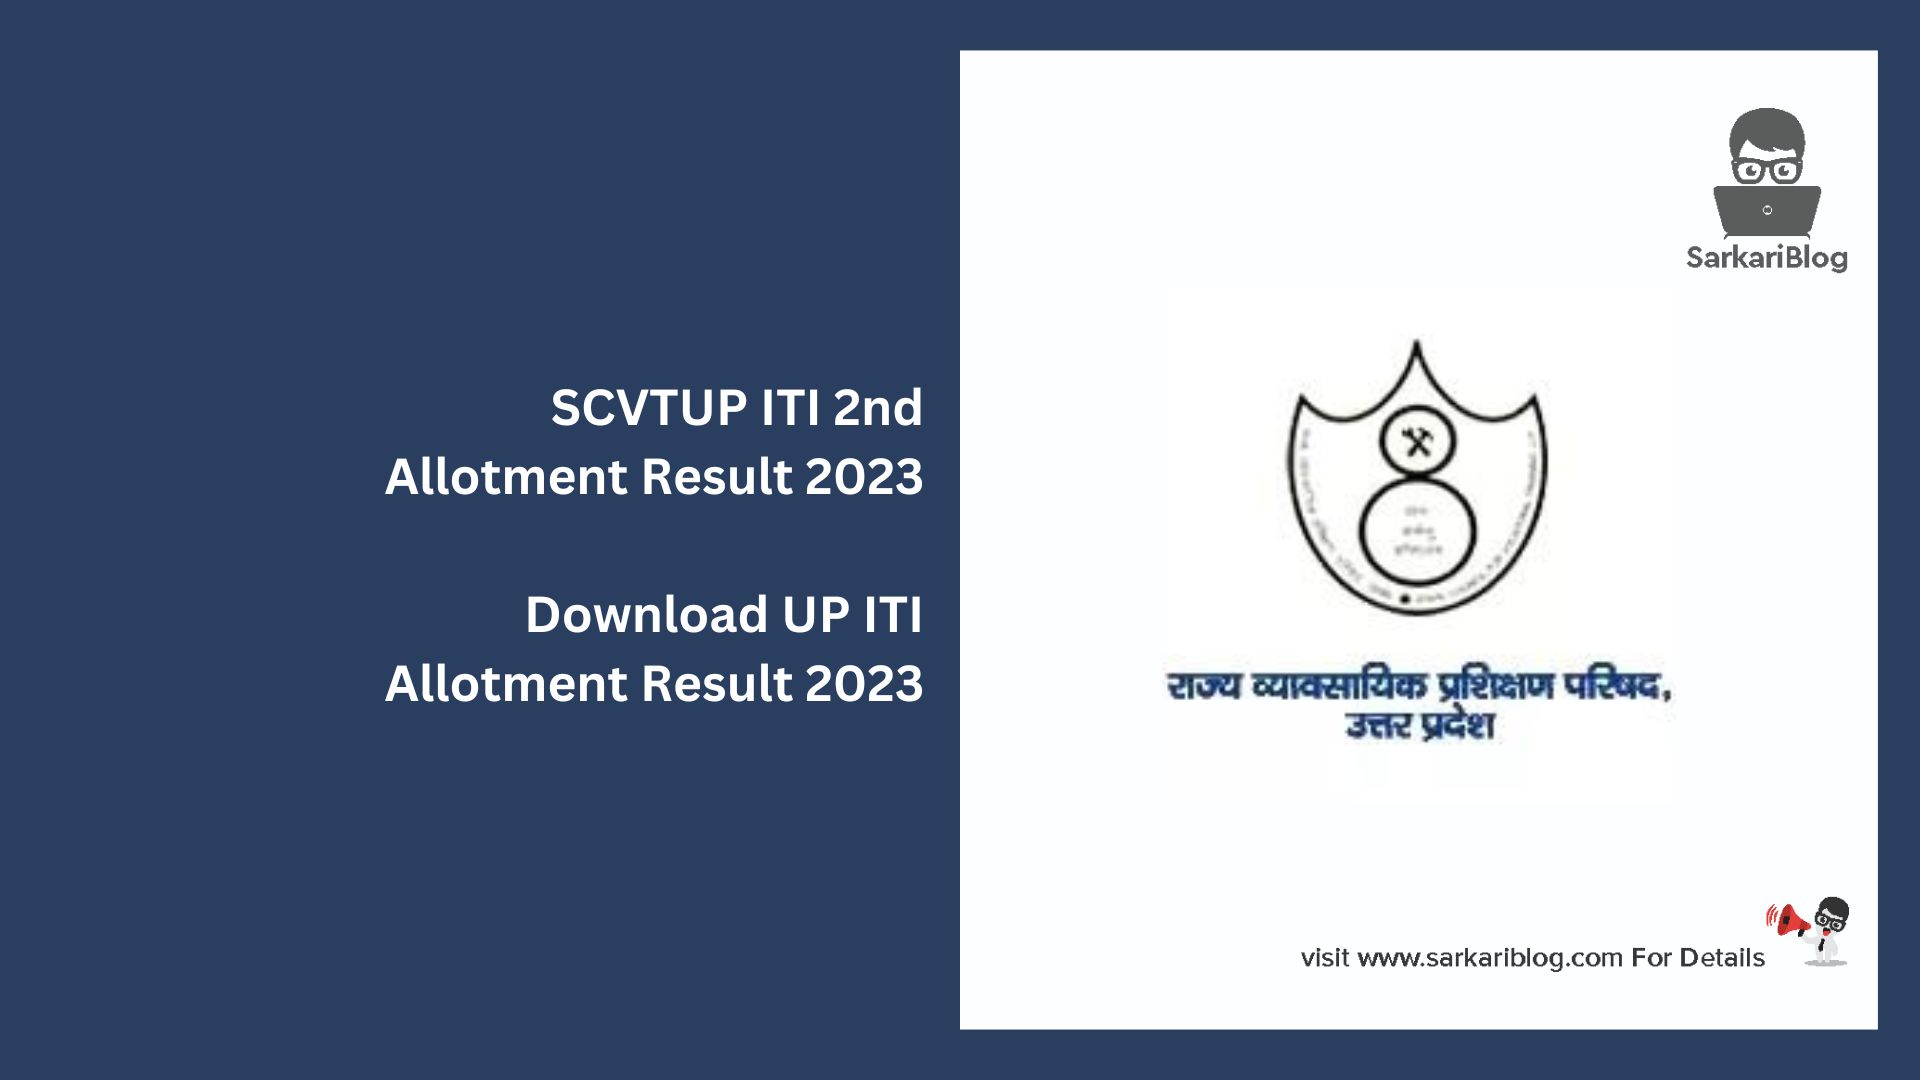 SCVTUP ITI 2nd Allotment Result 2023